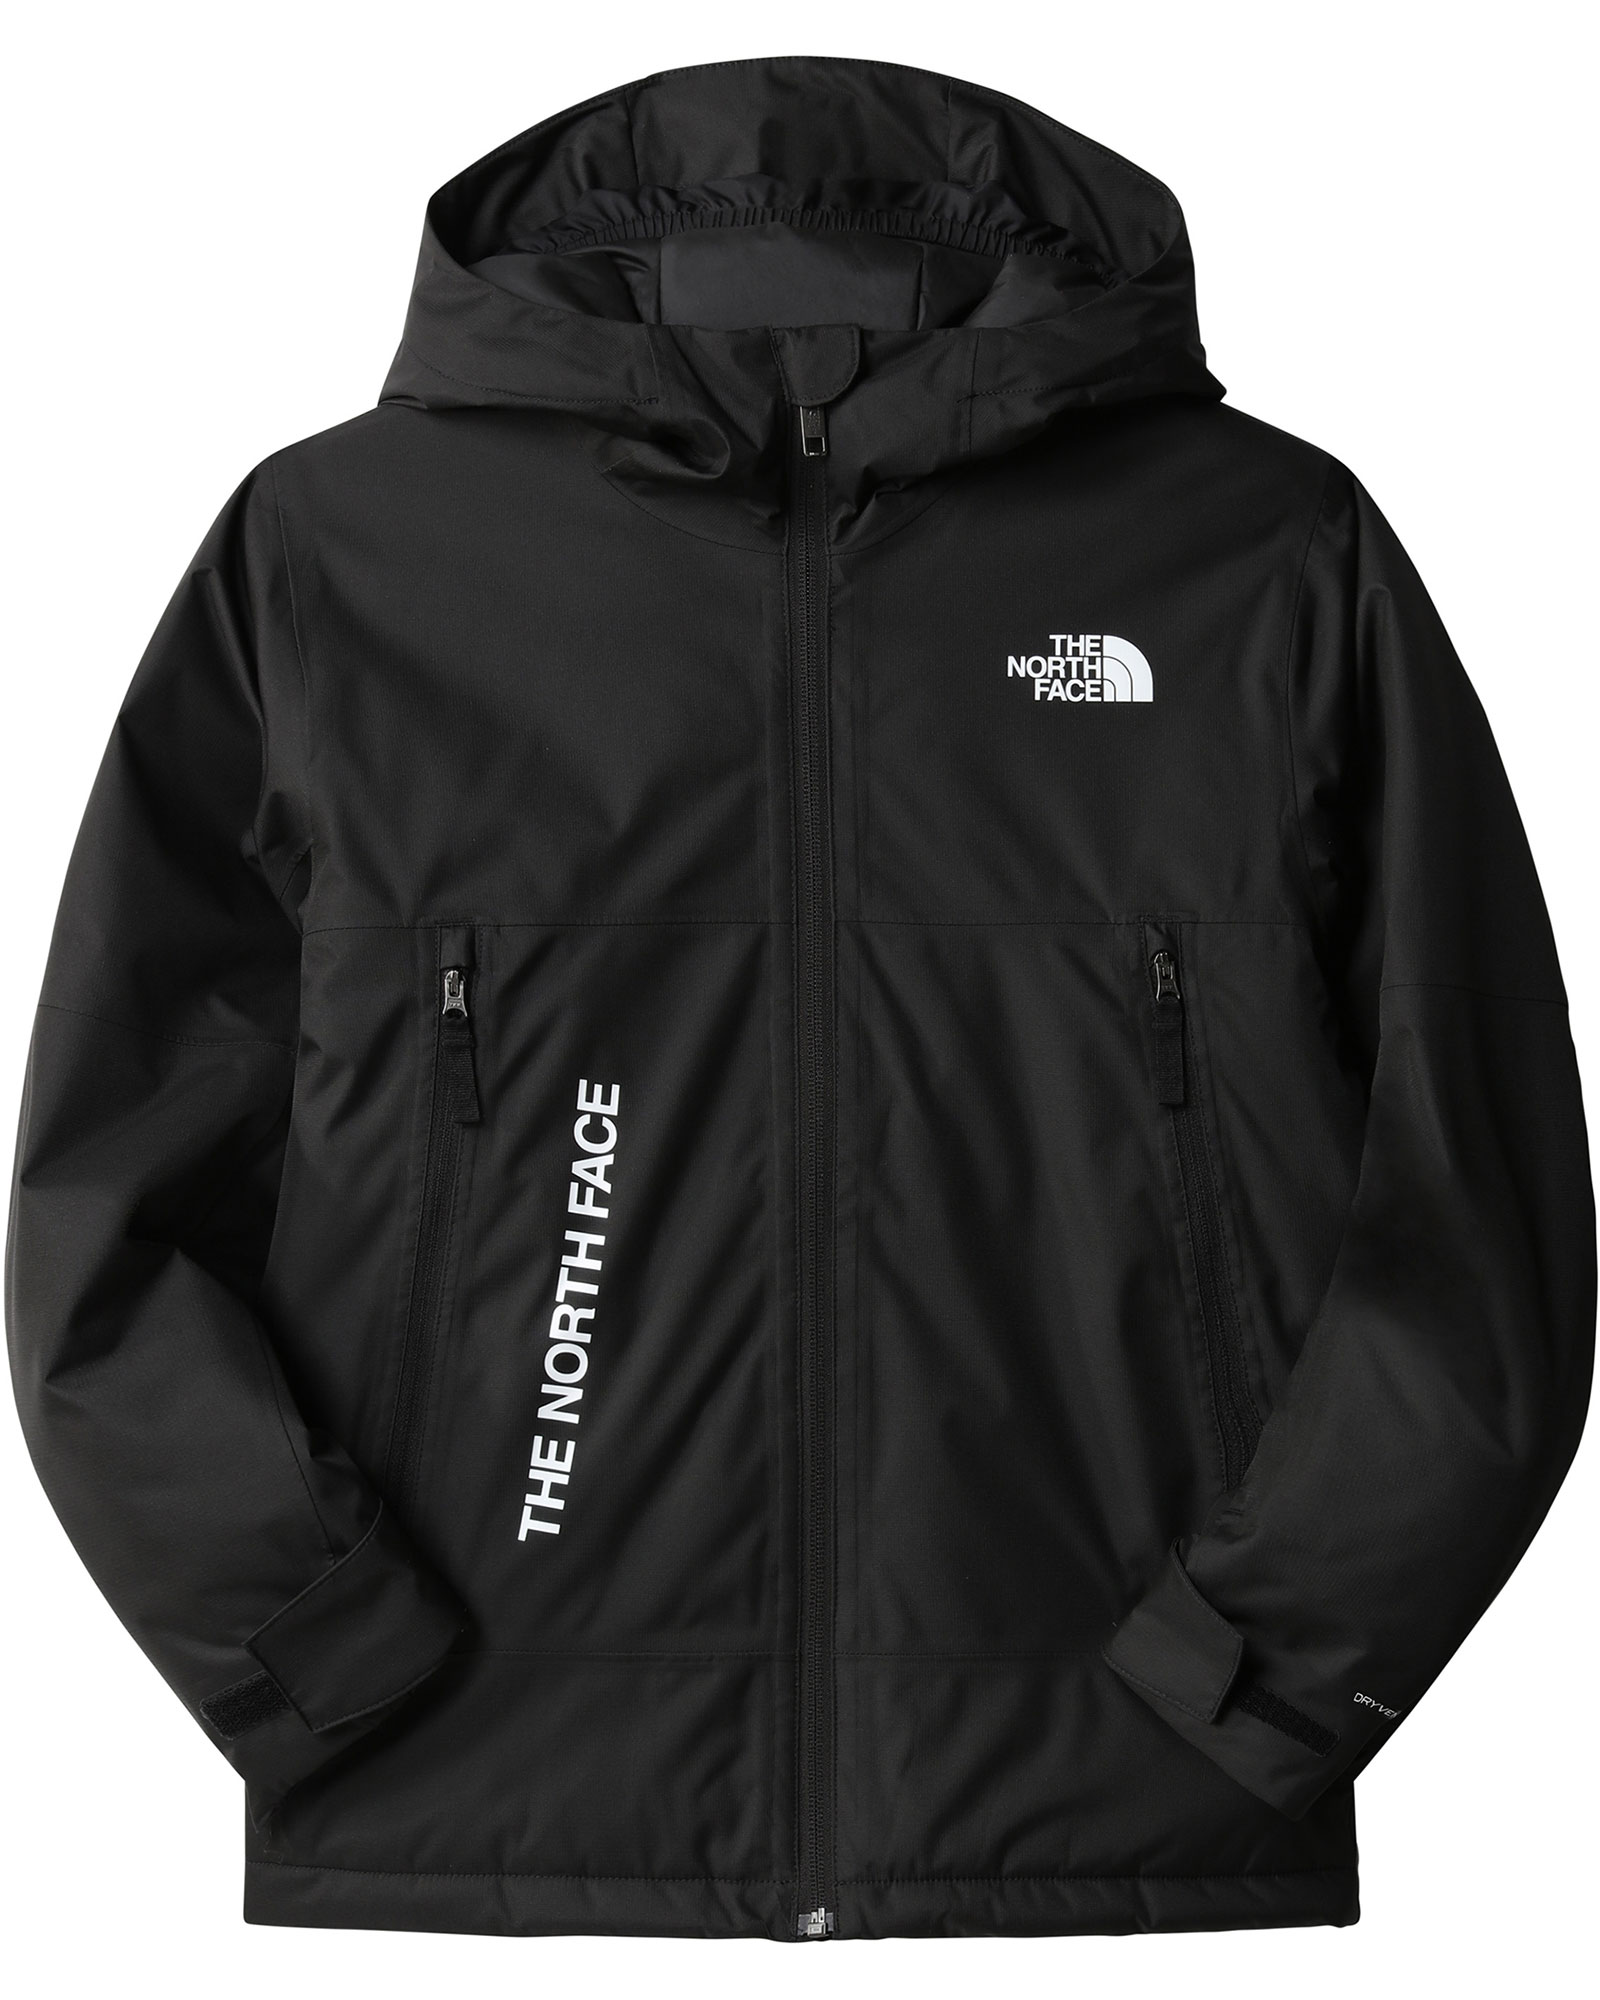 The North Face Freedom Kids Insulated Jacket Xlg